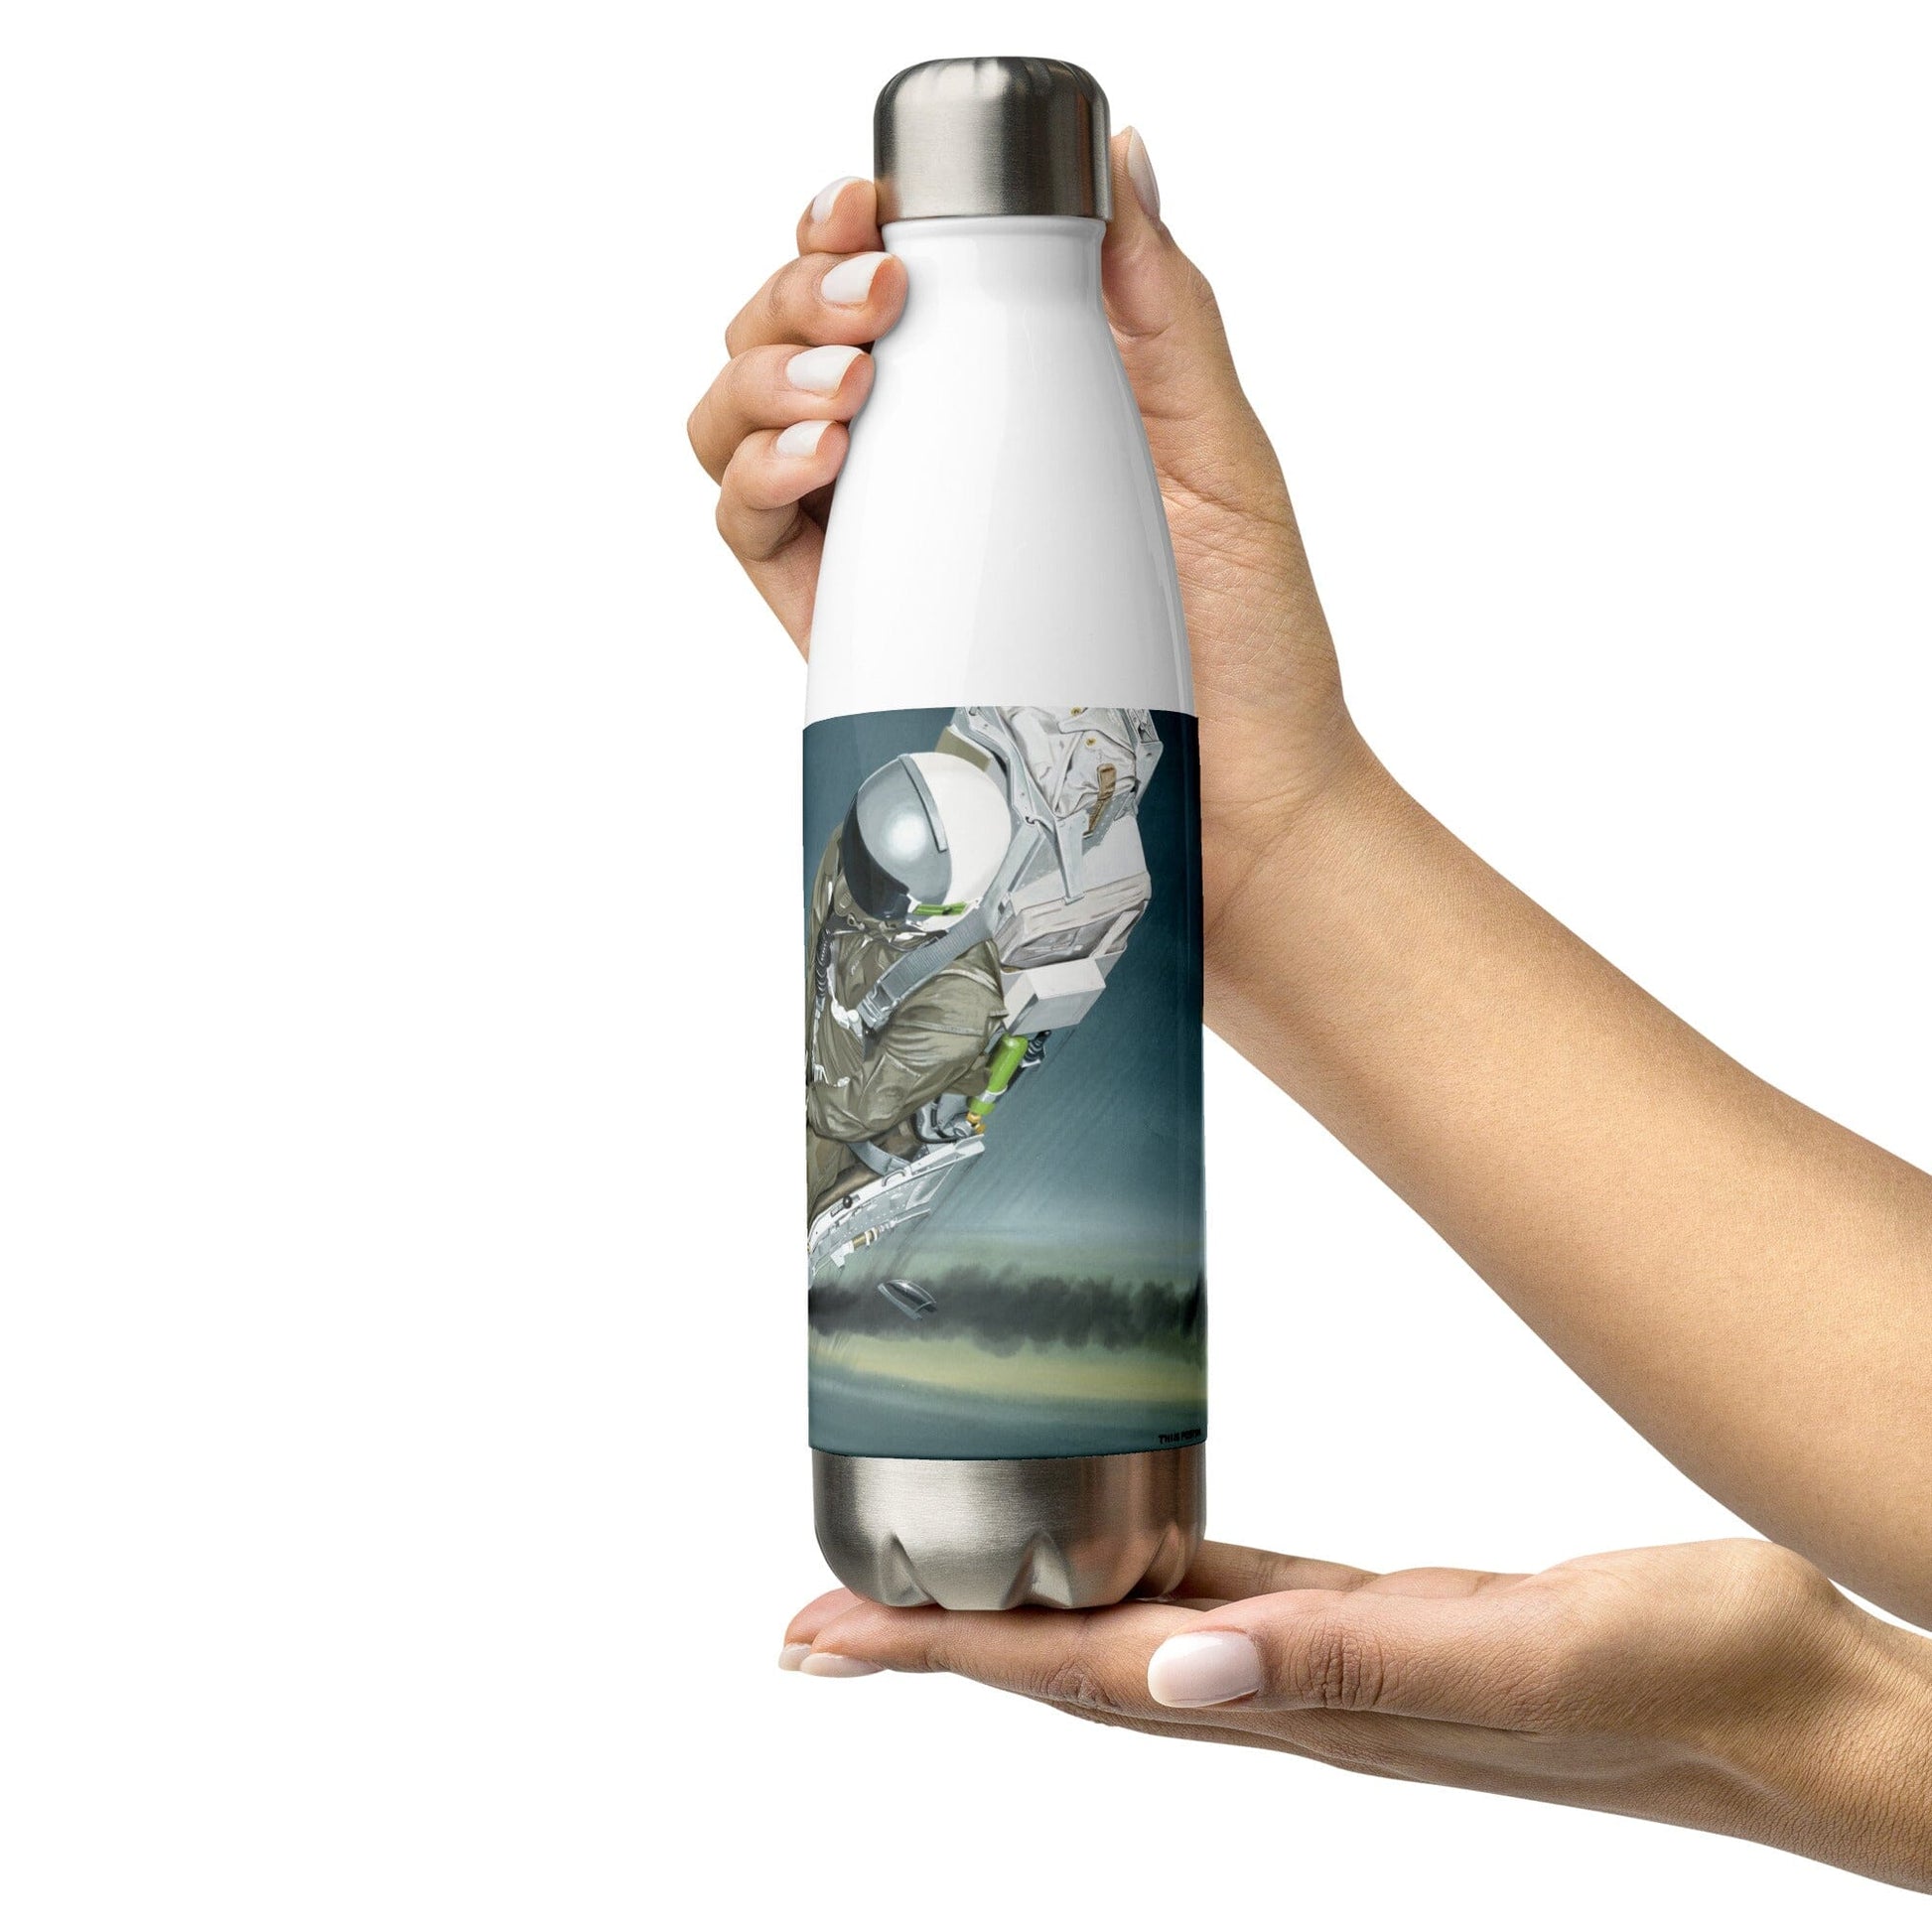 Thijs Postma - Water Bottle - F-16A Using Ejection Seat - Stainless Steel 17oz Water Bottles TP Aviation Art 